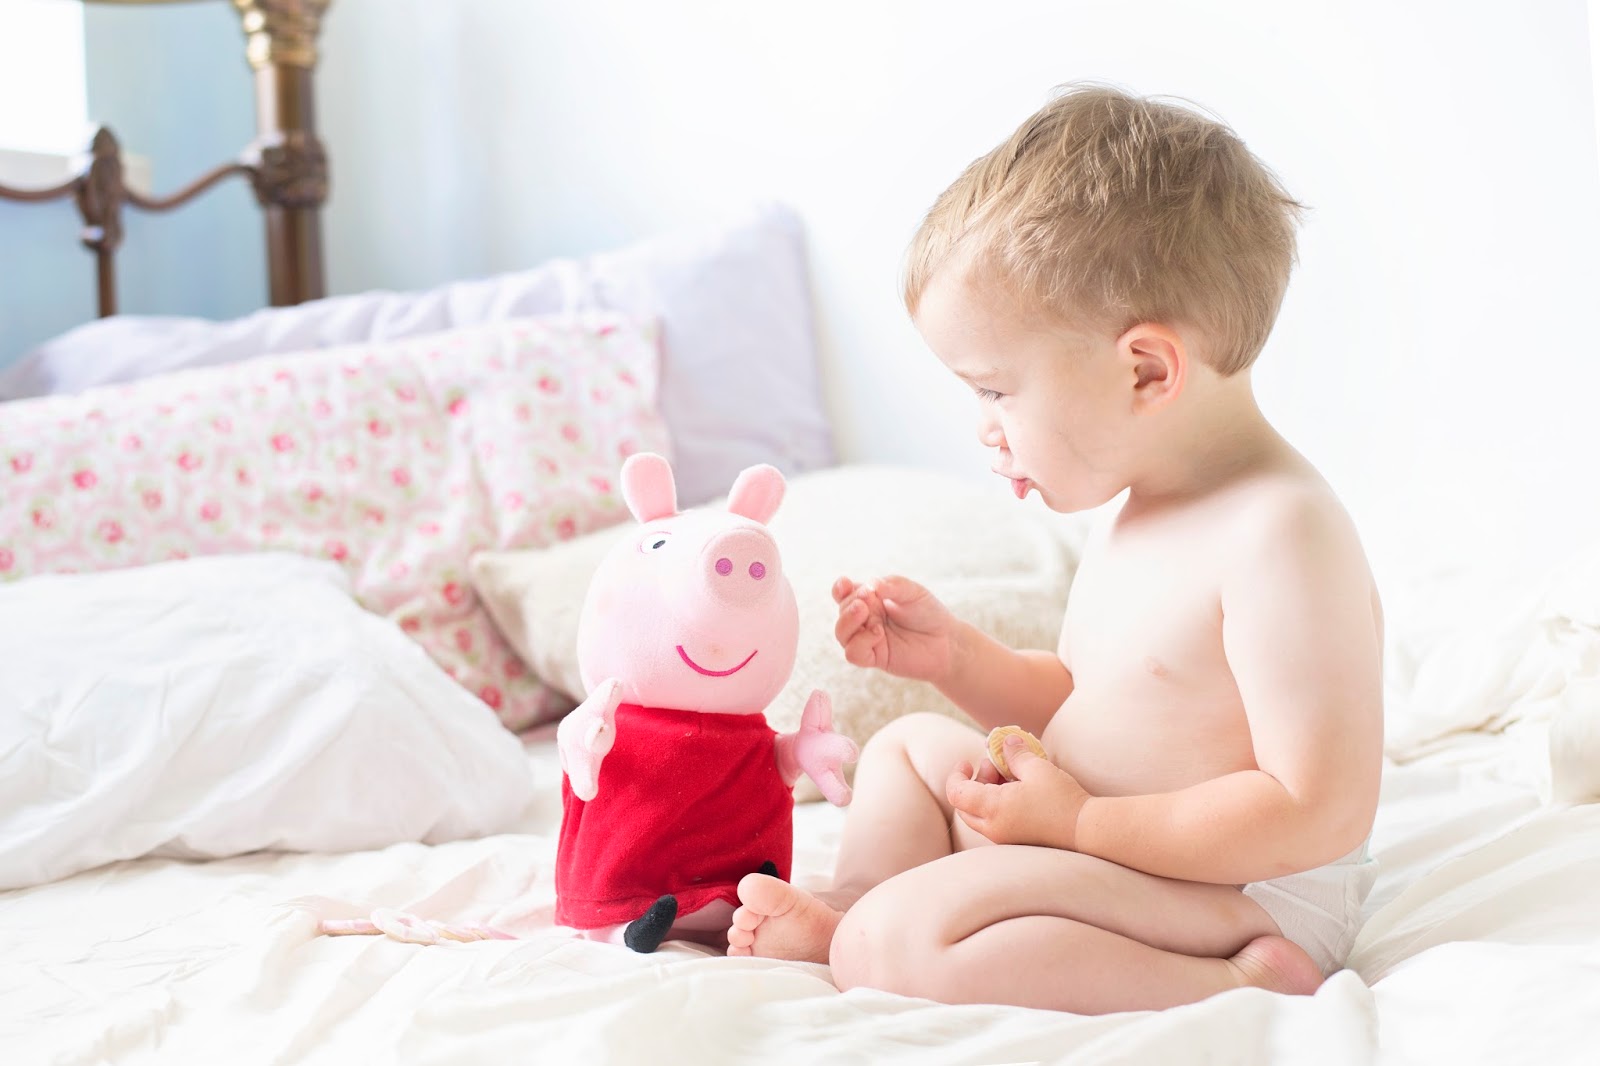 THE NEW PEPPA PIG TOYS: LAUGH WITH ME PEPPA